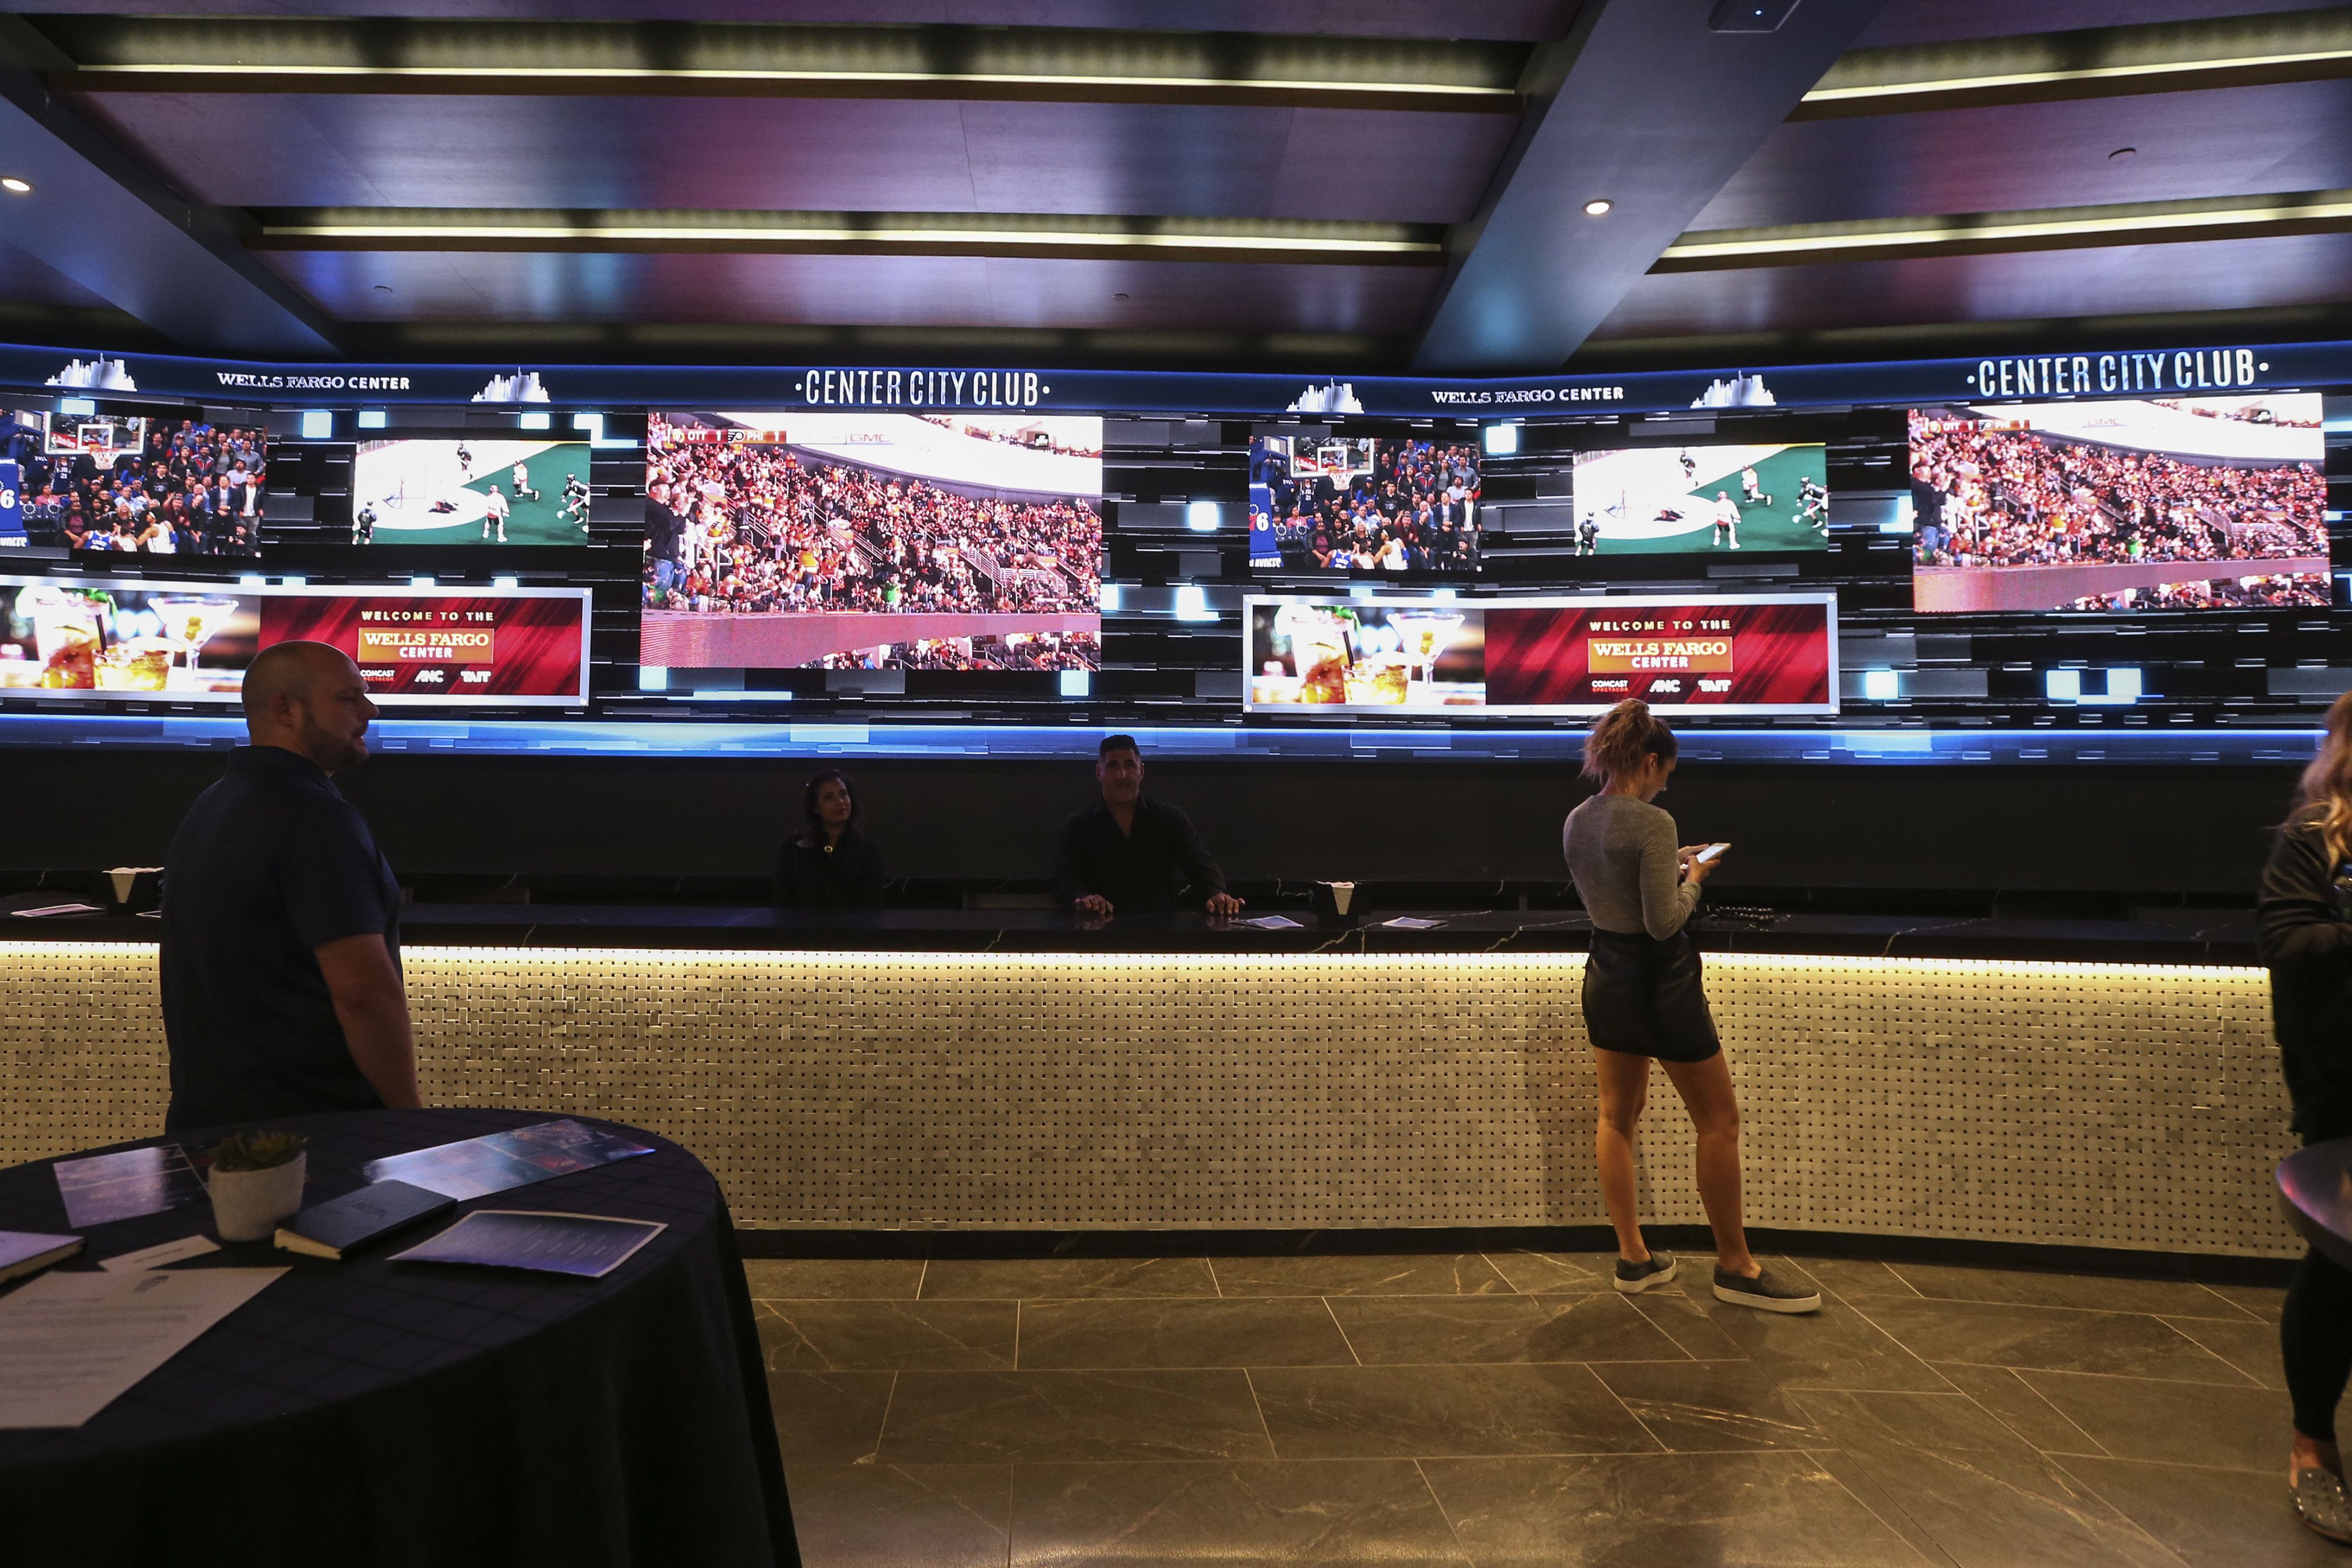 New Kinetic 4K Scoreboard, Center City Club, unveiled at Wells Fargo Center